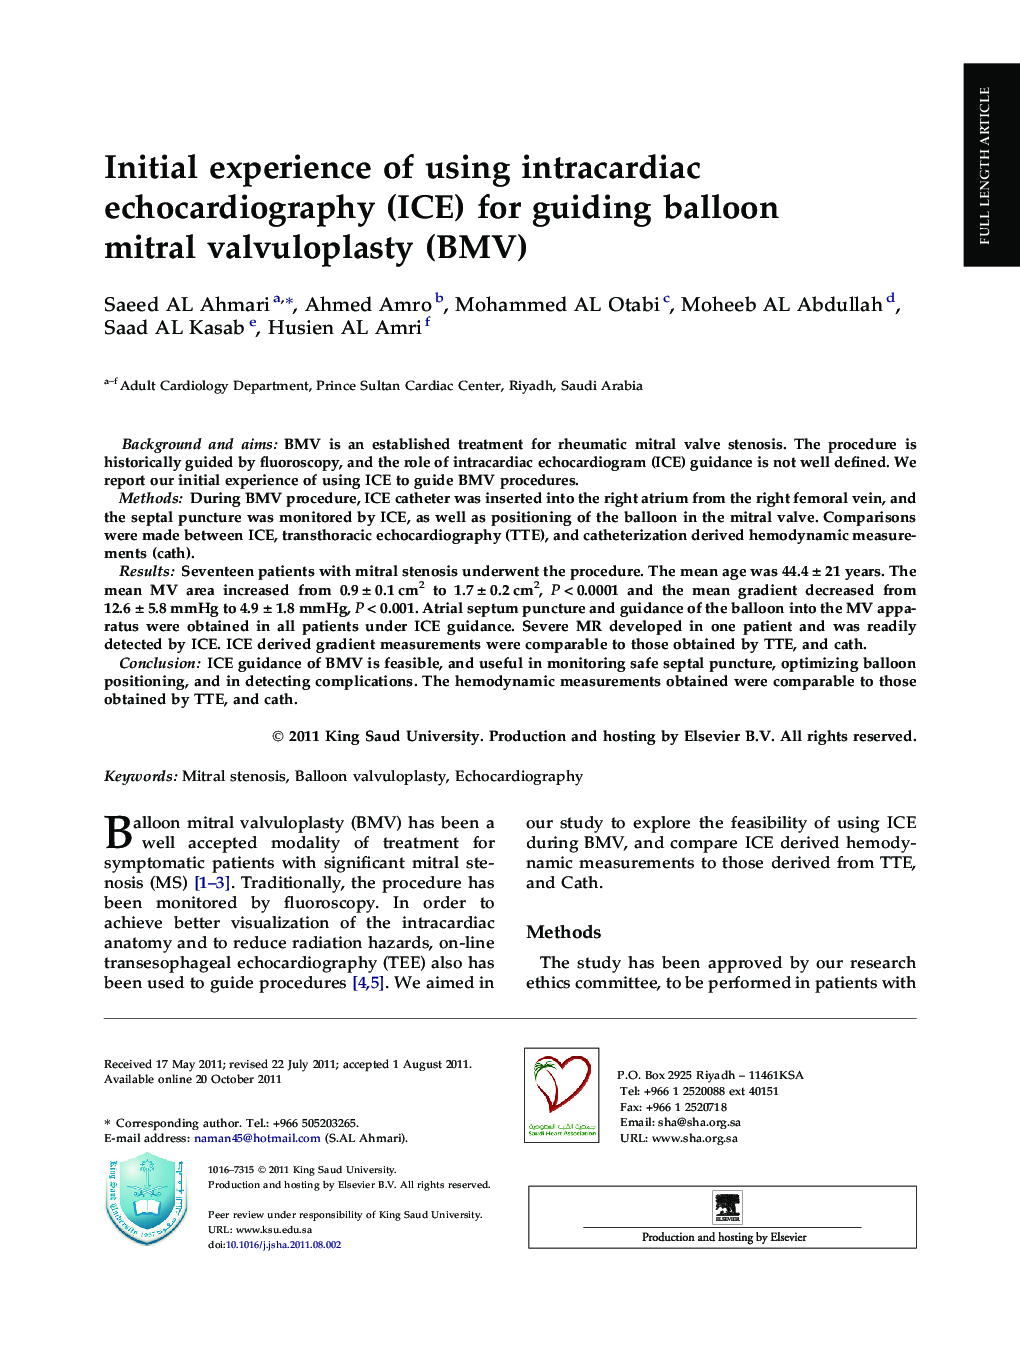 Initial experience of using intracardiac echocardiography (ICE) for guiding balloon mitral valvuloplasty (BMV)